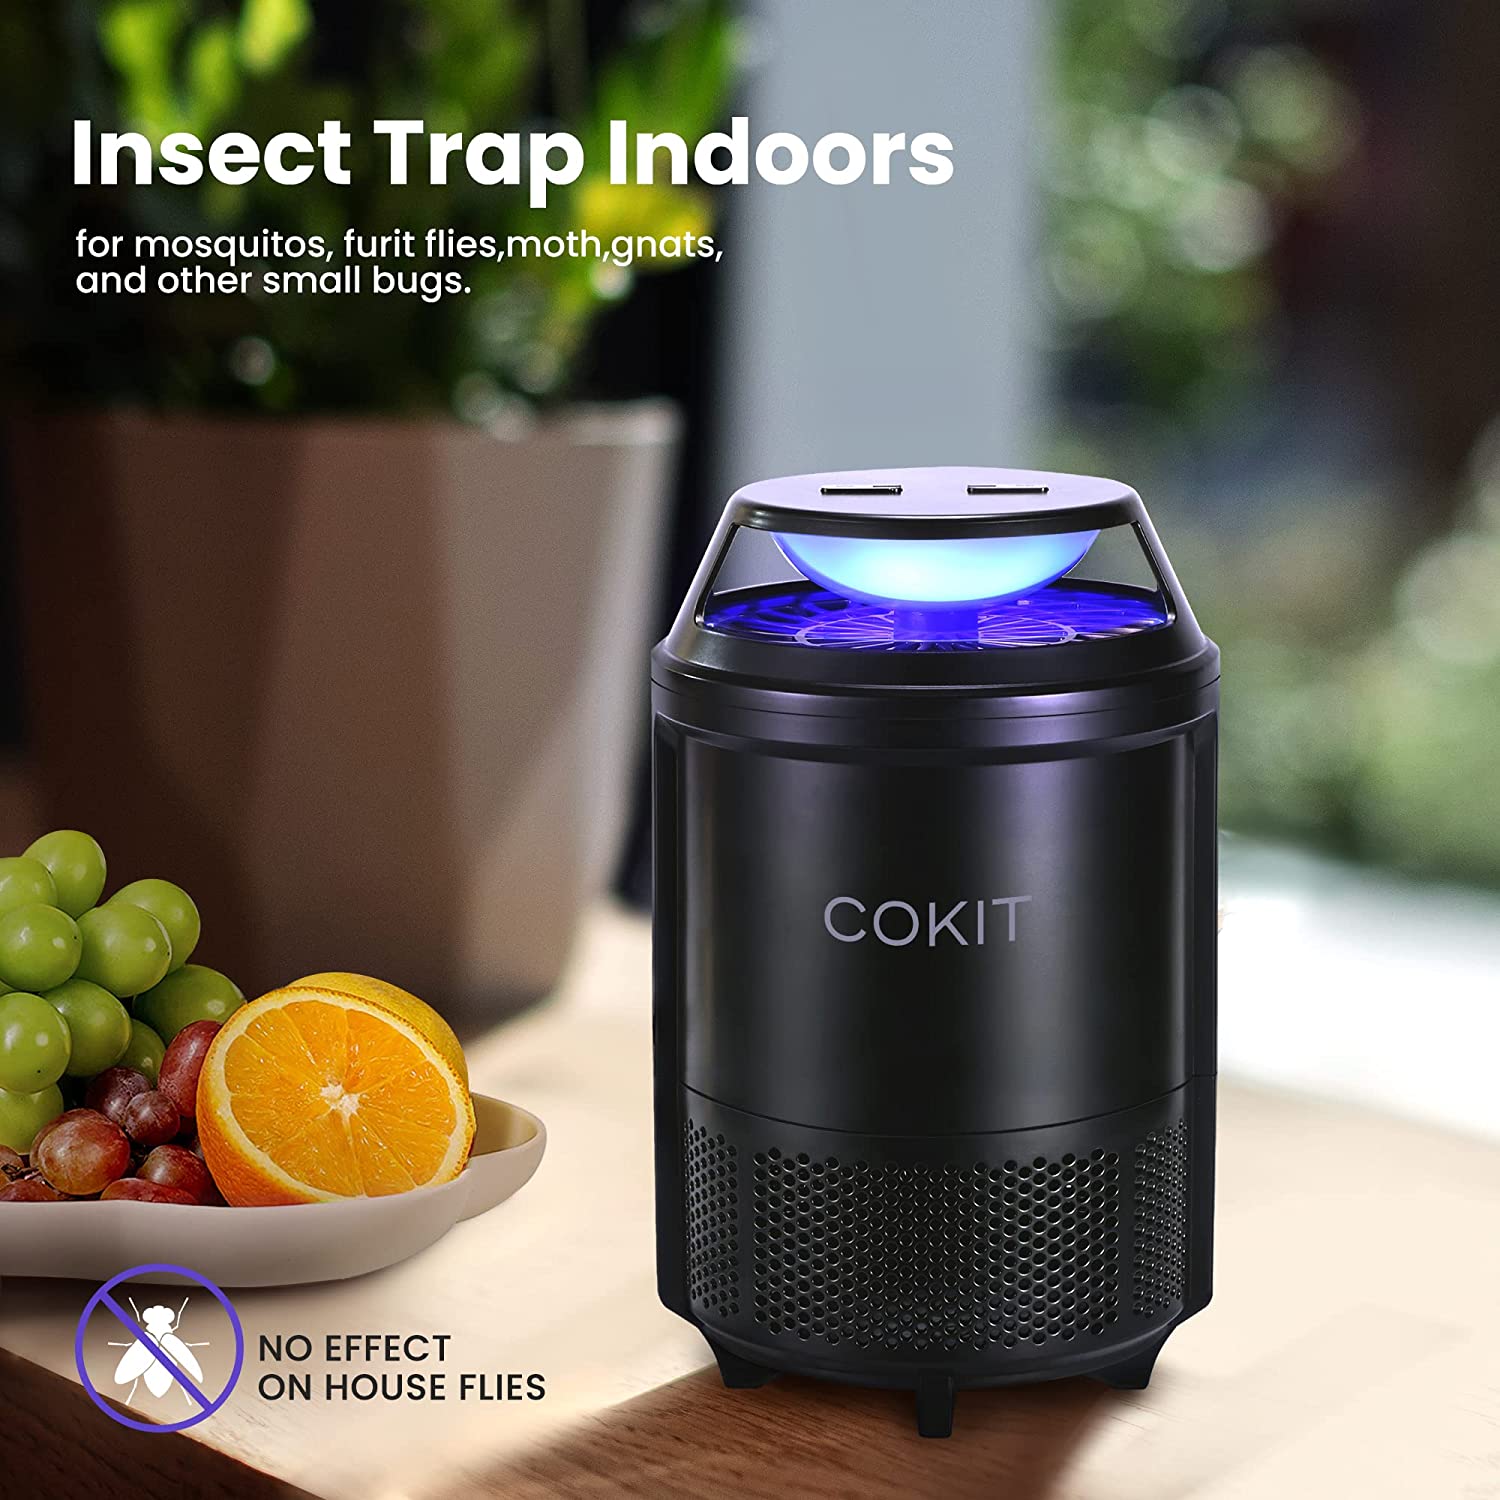 Insect Traps Indoor and Outdoor - Catch Insects with Suction, Bug Lights and Sticky Glue (Black)